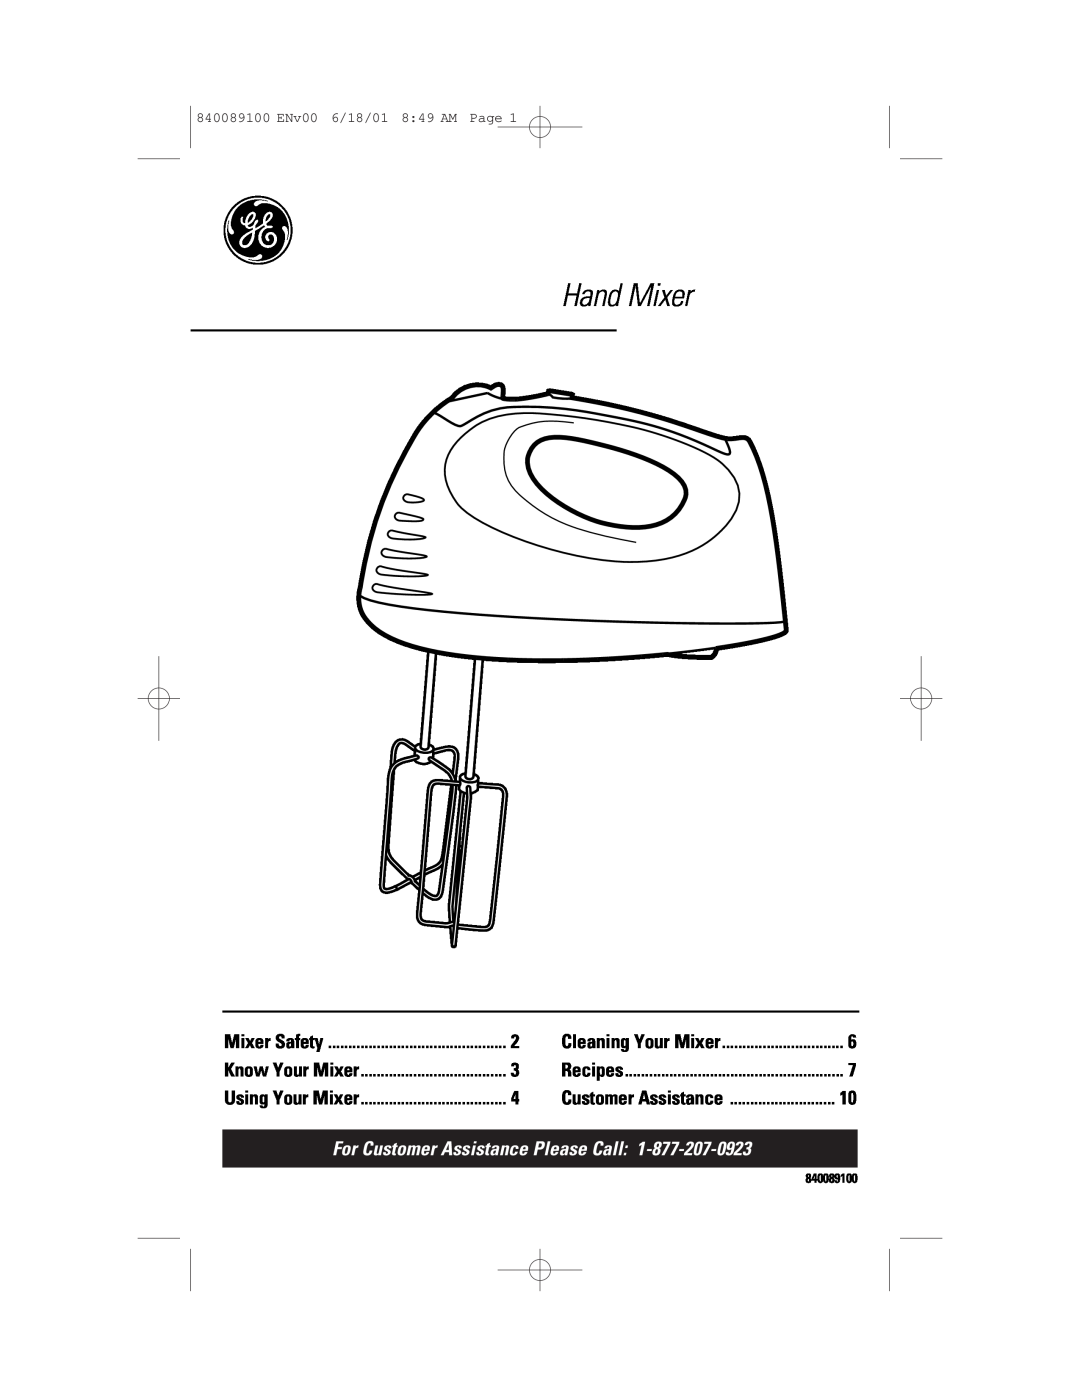 GE 106742 manual Hand Mixer, For Customer Assistance Please Call, Mixer Safety, Cleaning Your Mixer, Know Your Mixer 